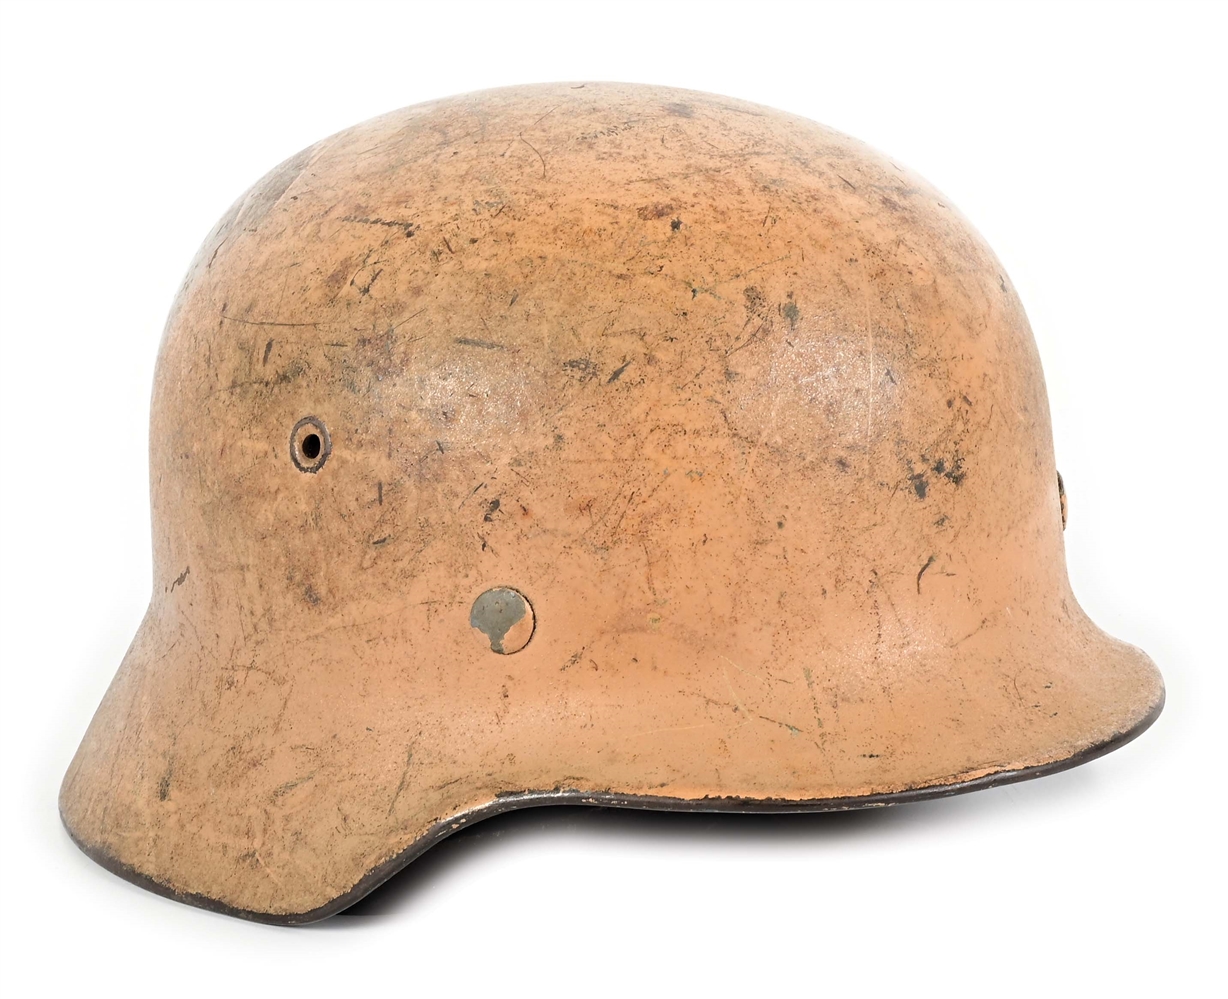 GERMAN WWII HEER M40 TWO-COLOR SPRAY CAMOUFLAGE HELMET CAPTURED BY US OFFICER IN TUNISIA, MAY 1943.